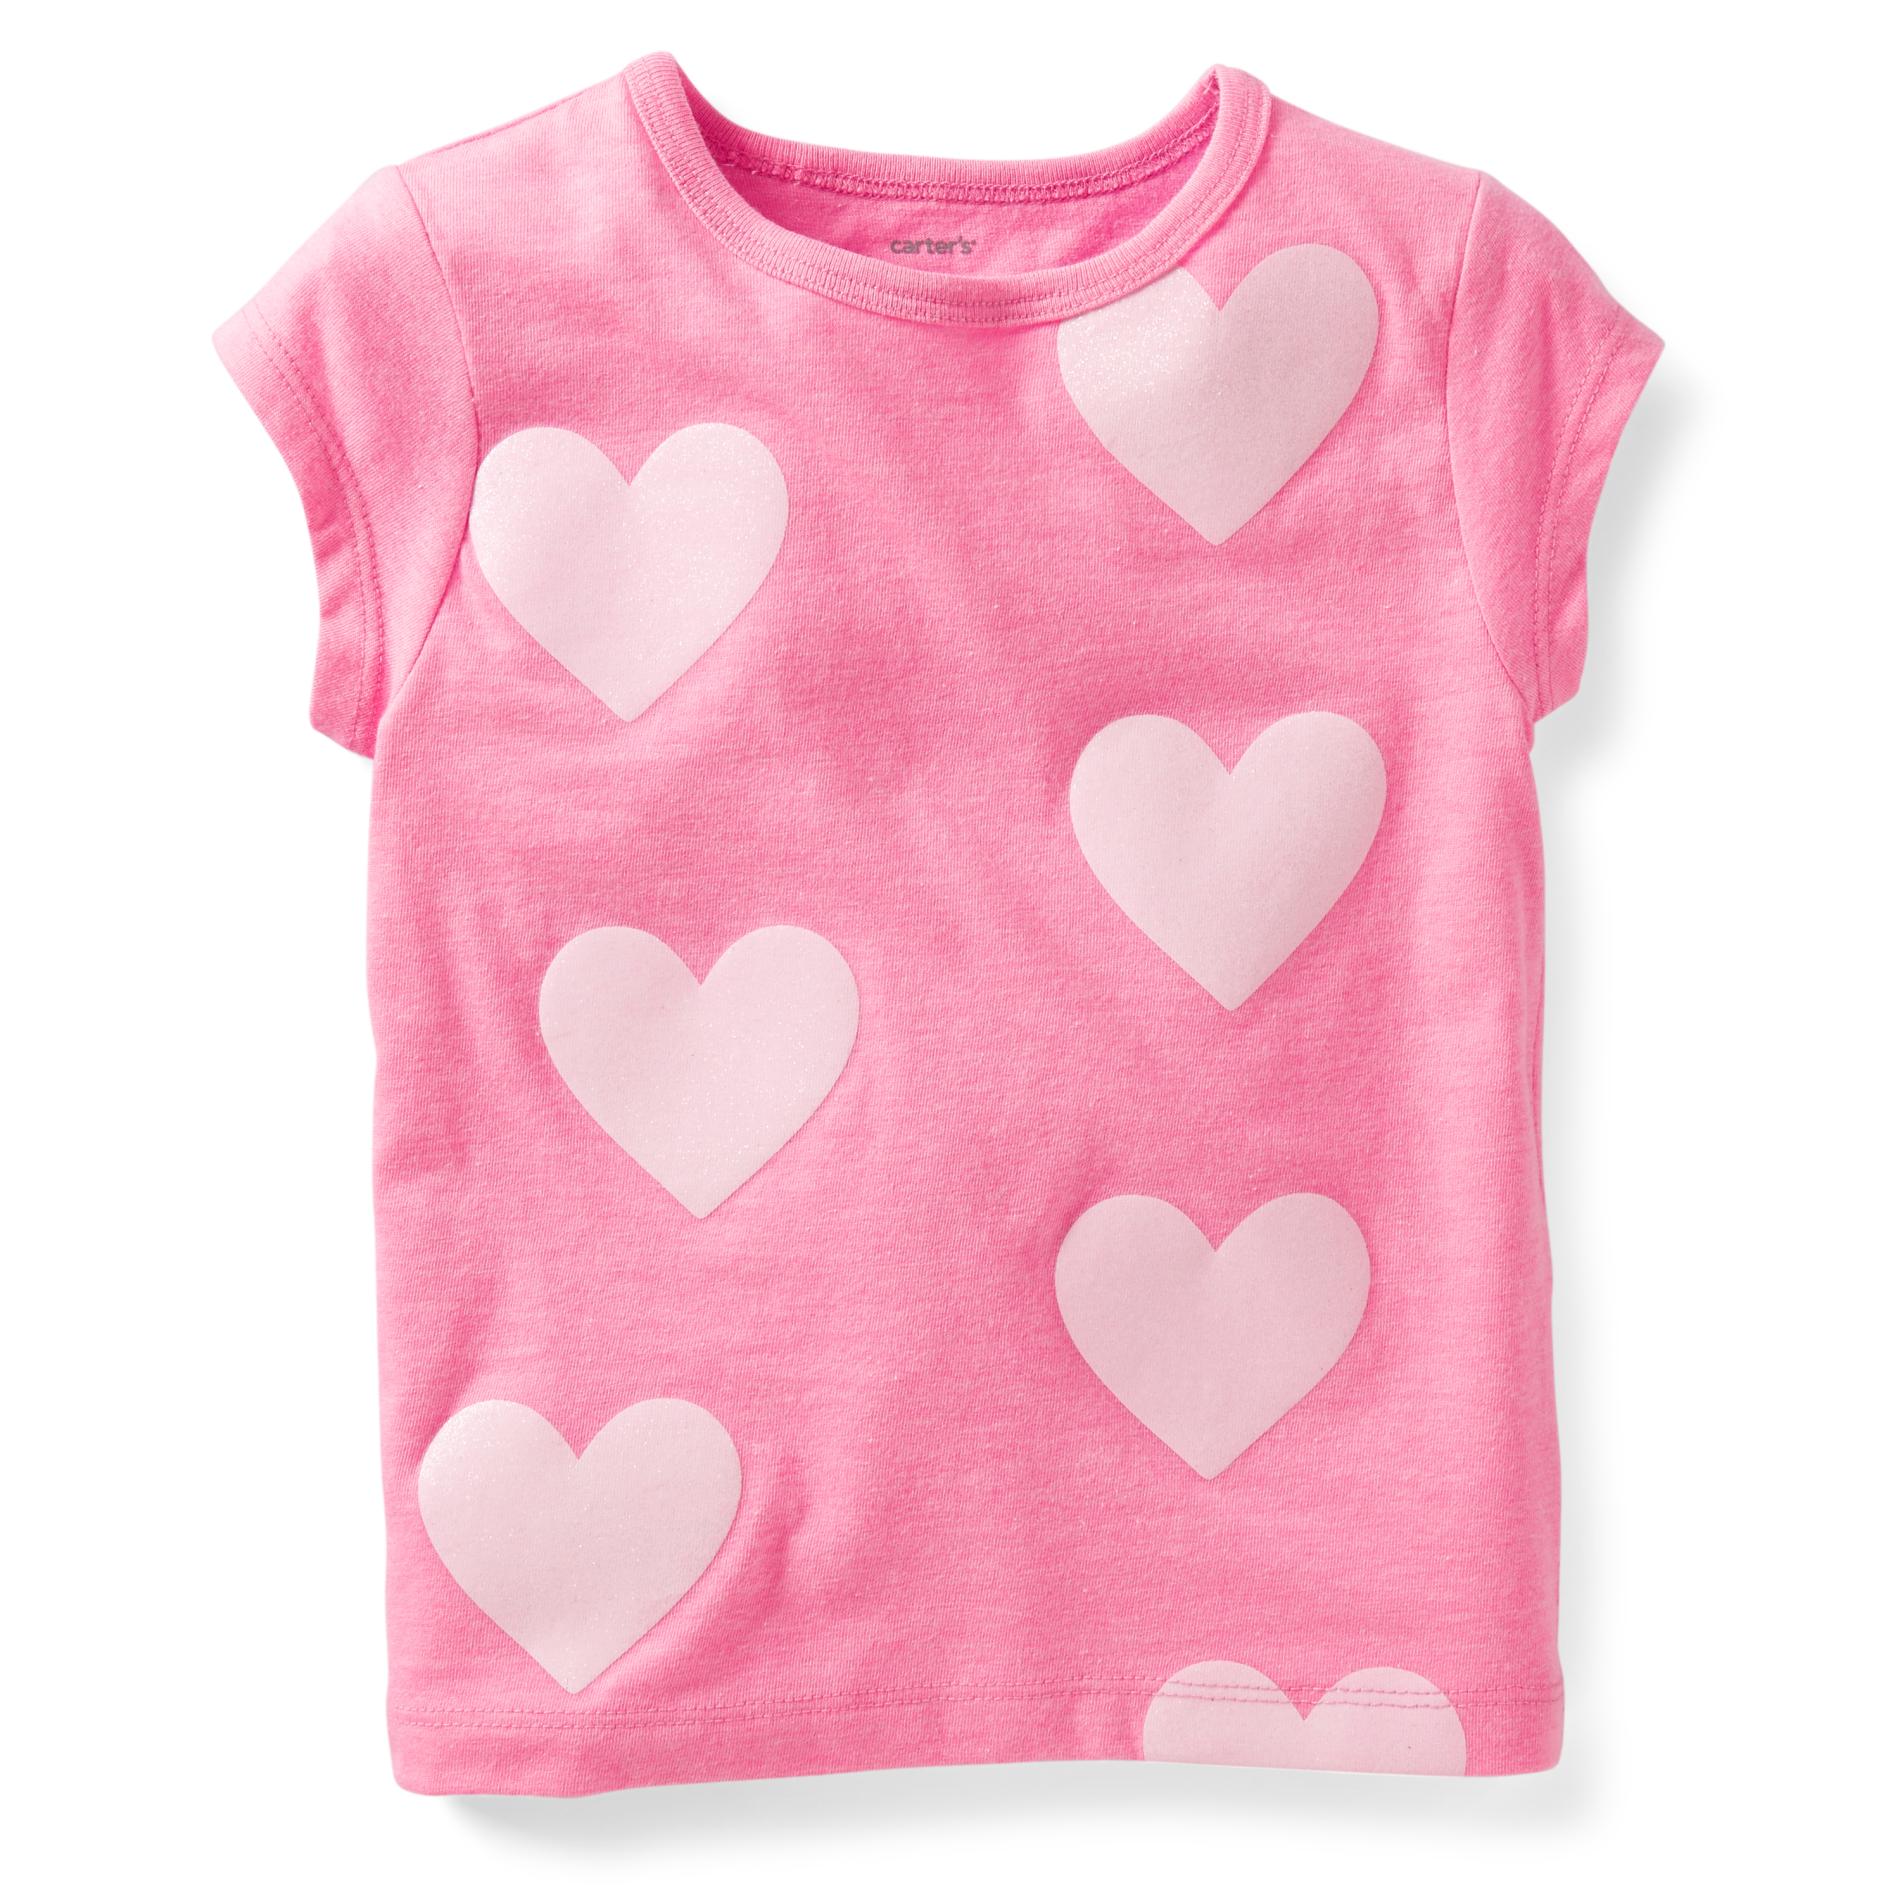 Carter's Girl's Graphic T-Shirt - Hearts